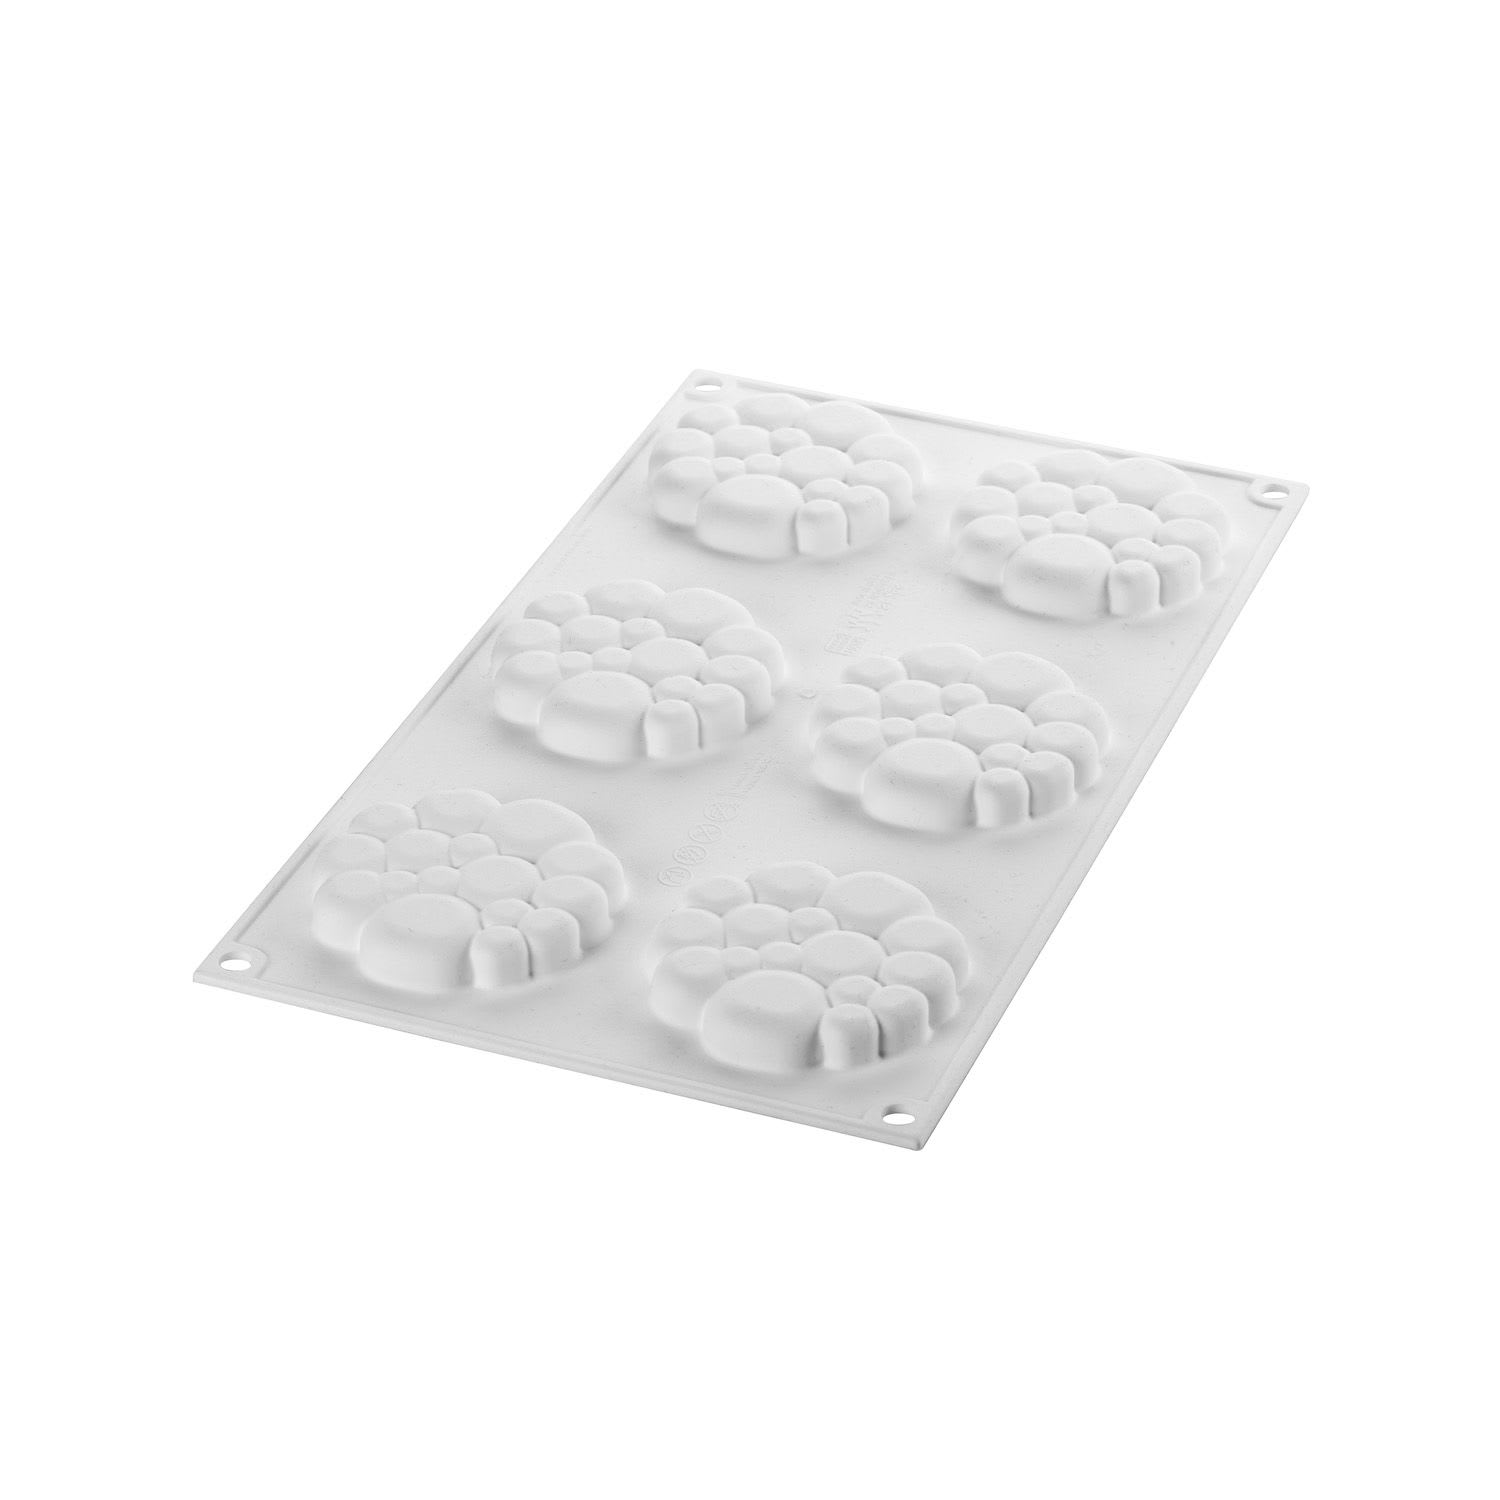 Mini Ice Cube Trays - Great for Small Crushed Ice - Silicone Ice Tray Molds,  2 Pack - Miscellaneous